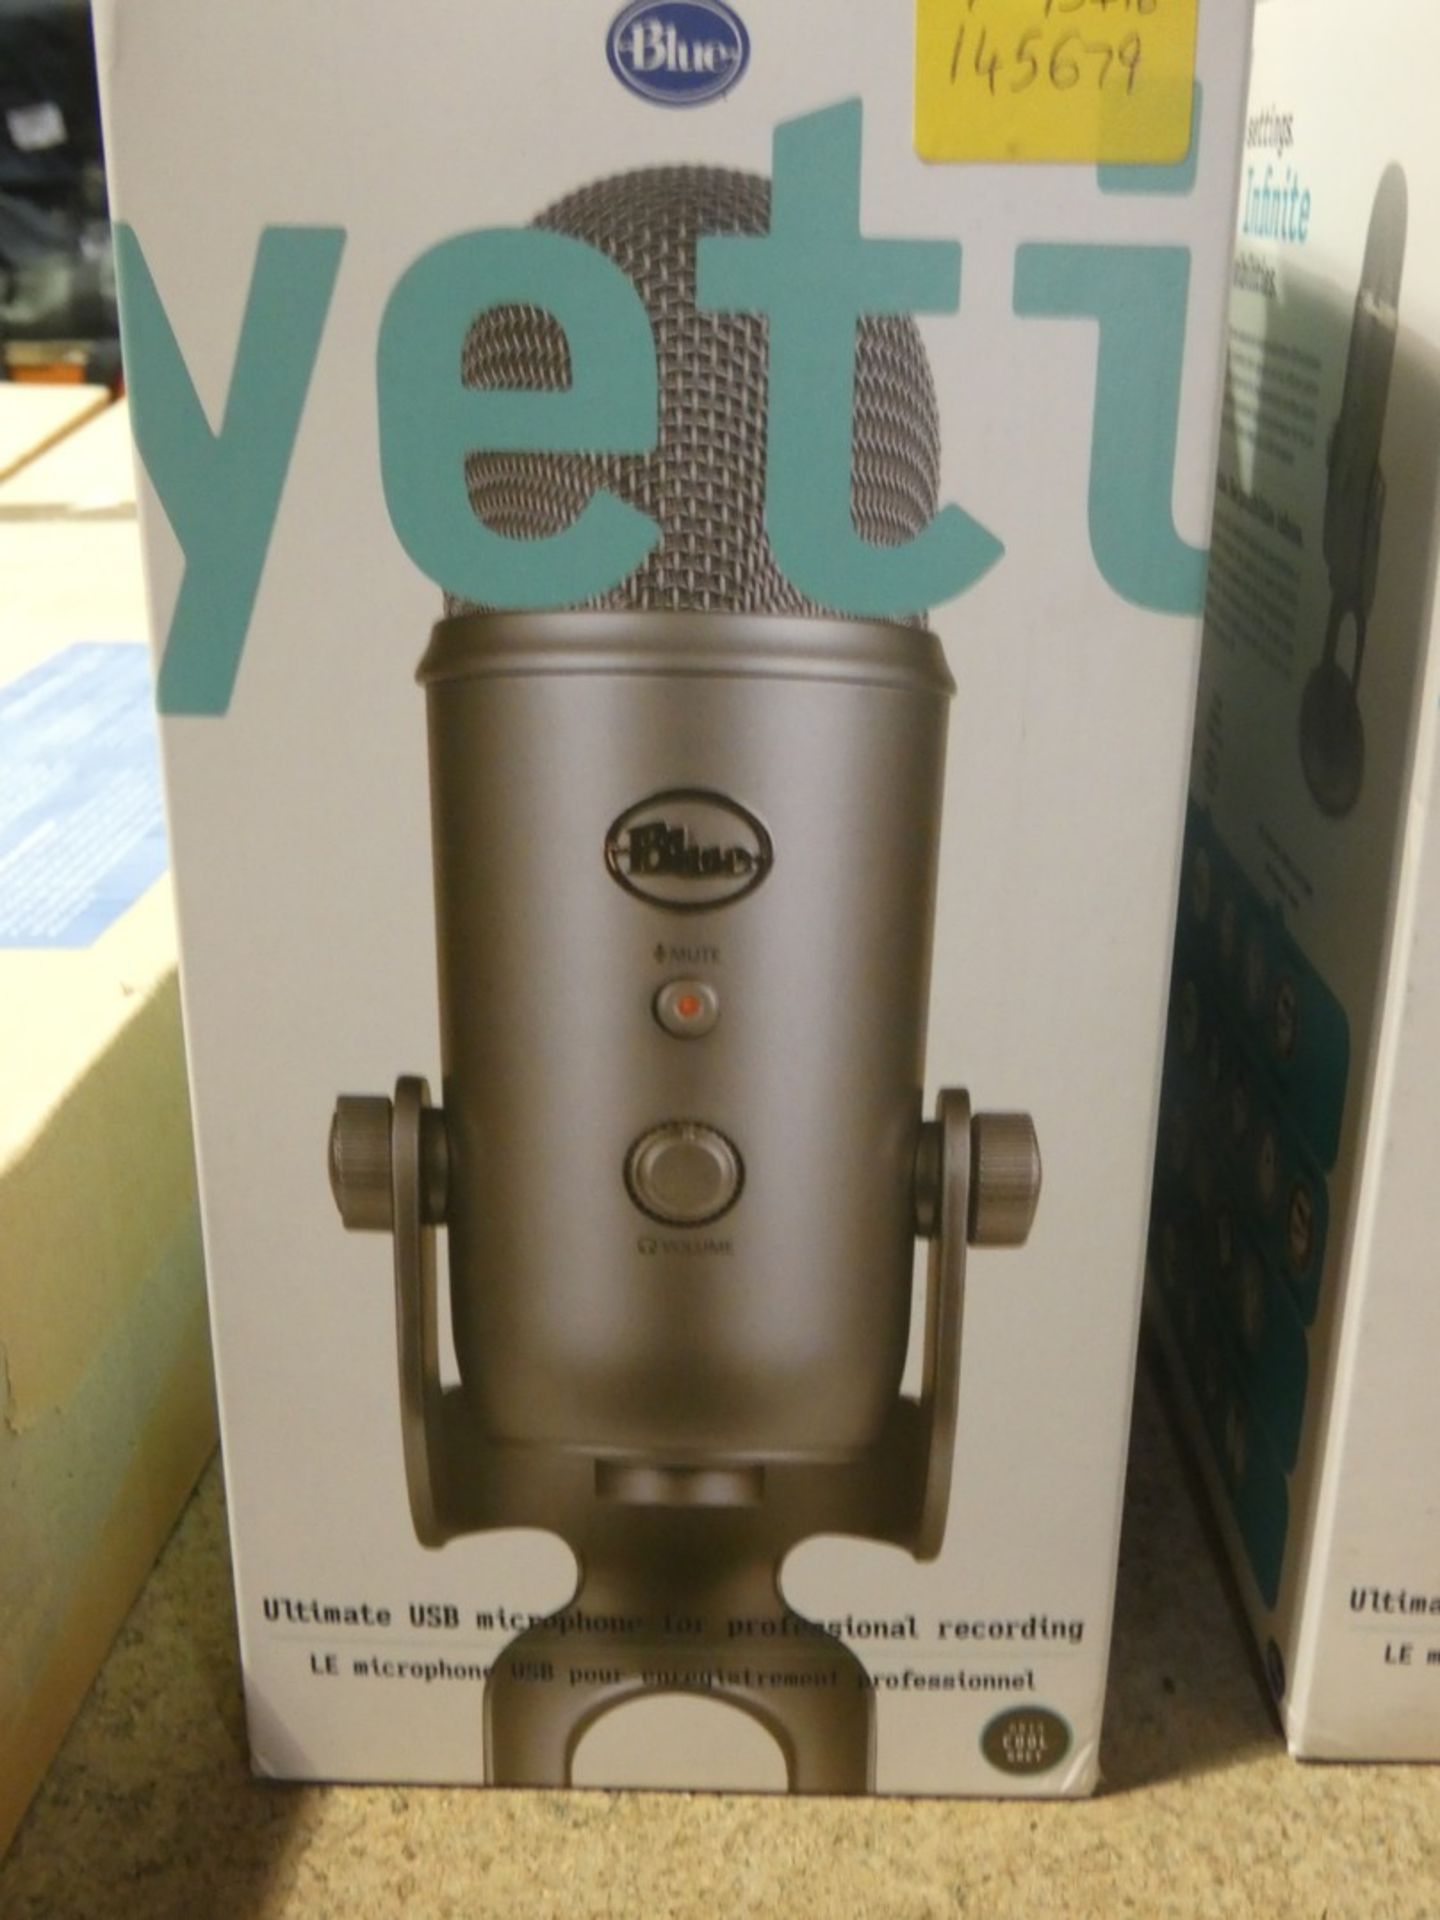 Boxed Yeti Whiteout Ultimate USB Microphone For Professional Recording And Broadcasting